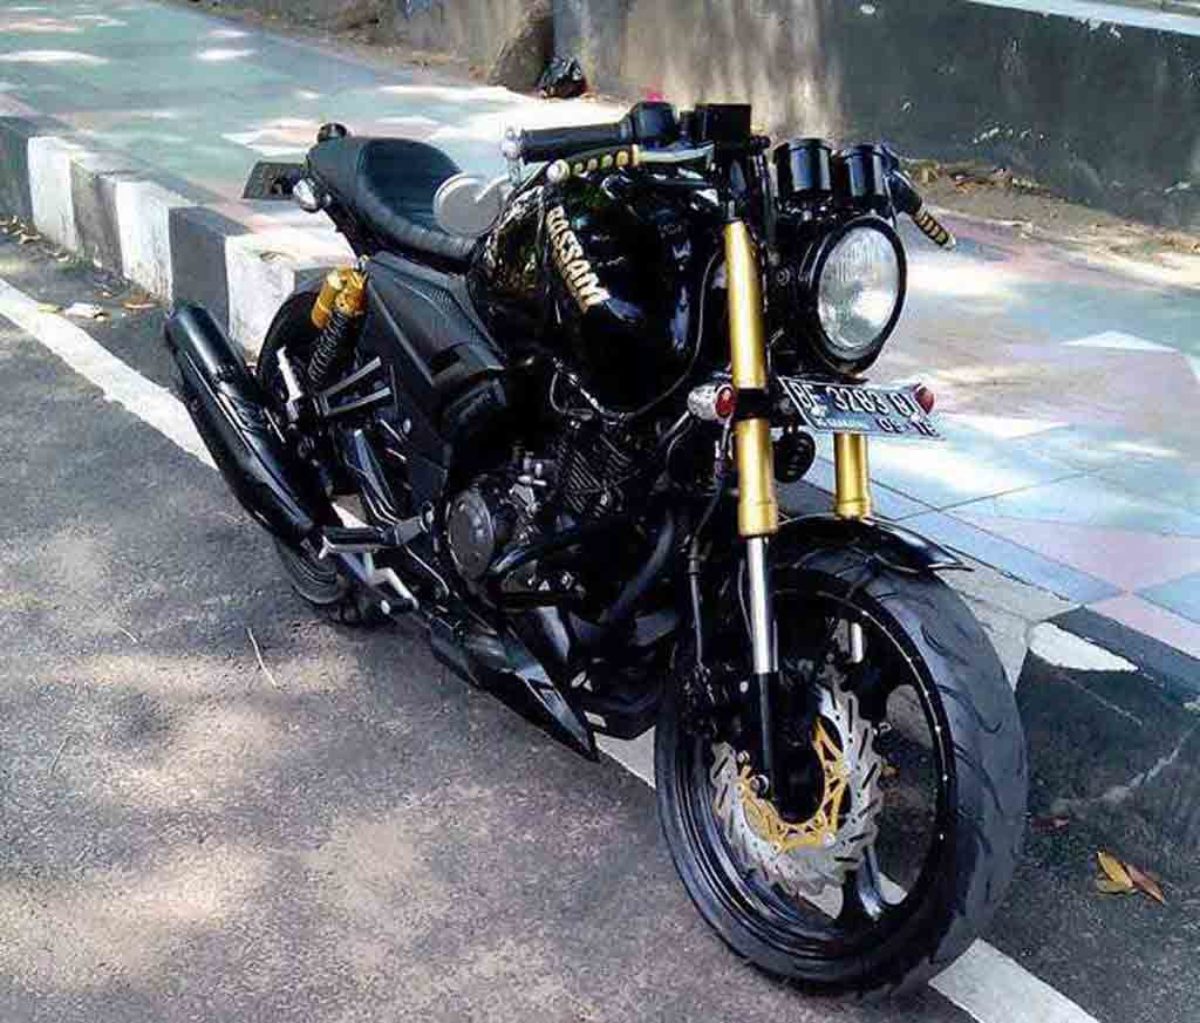 Customised Tvs Apache Rtr 180 Looks Very Aggressive In Cafe Racer